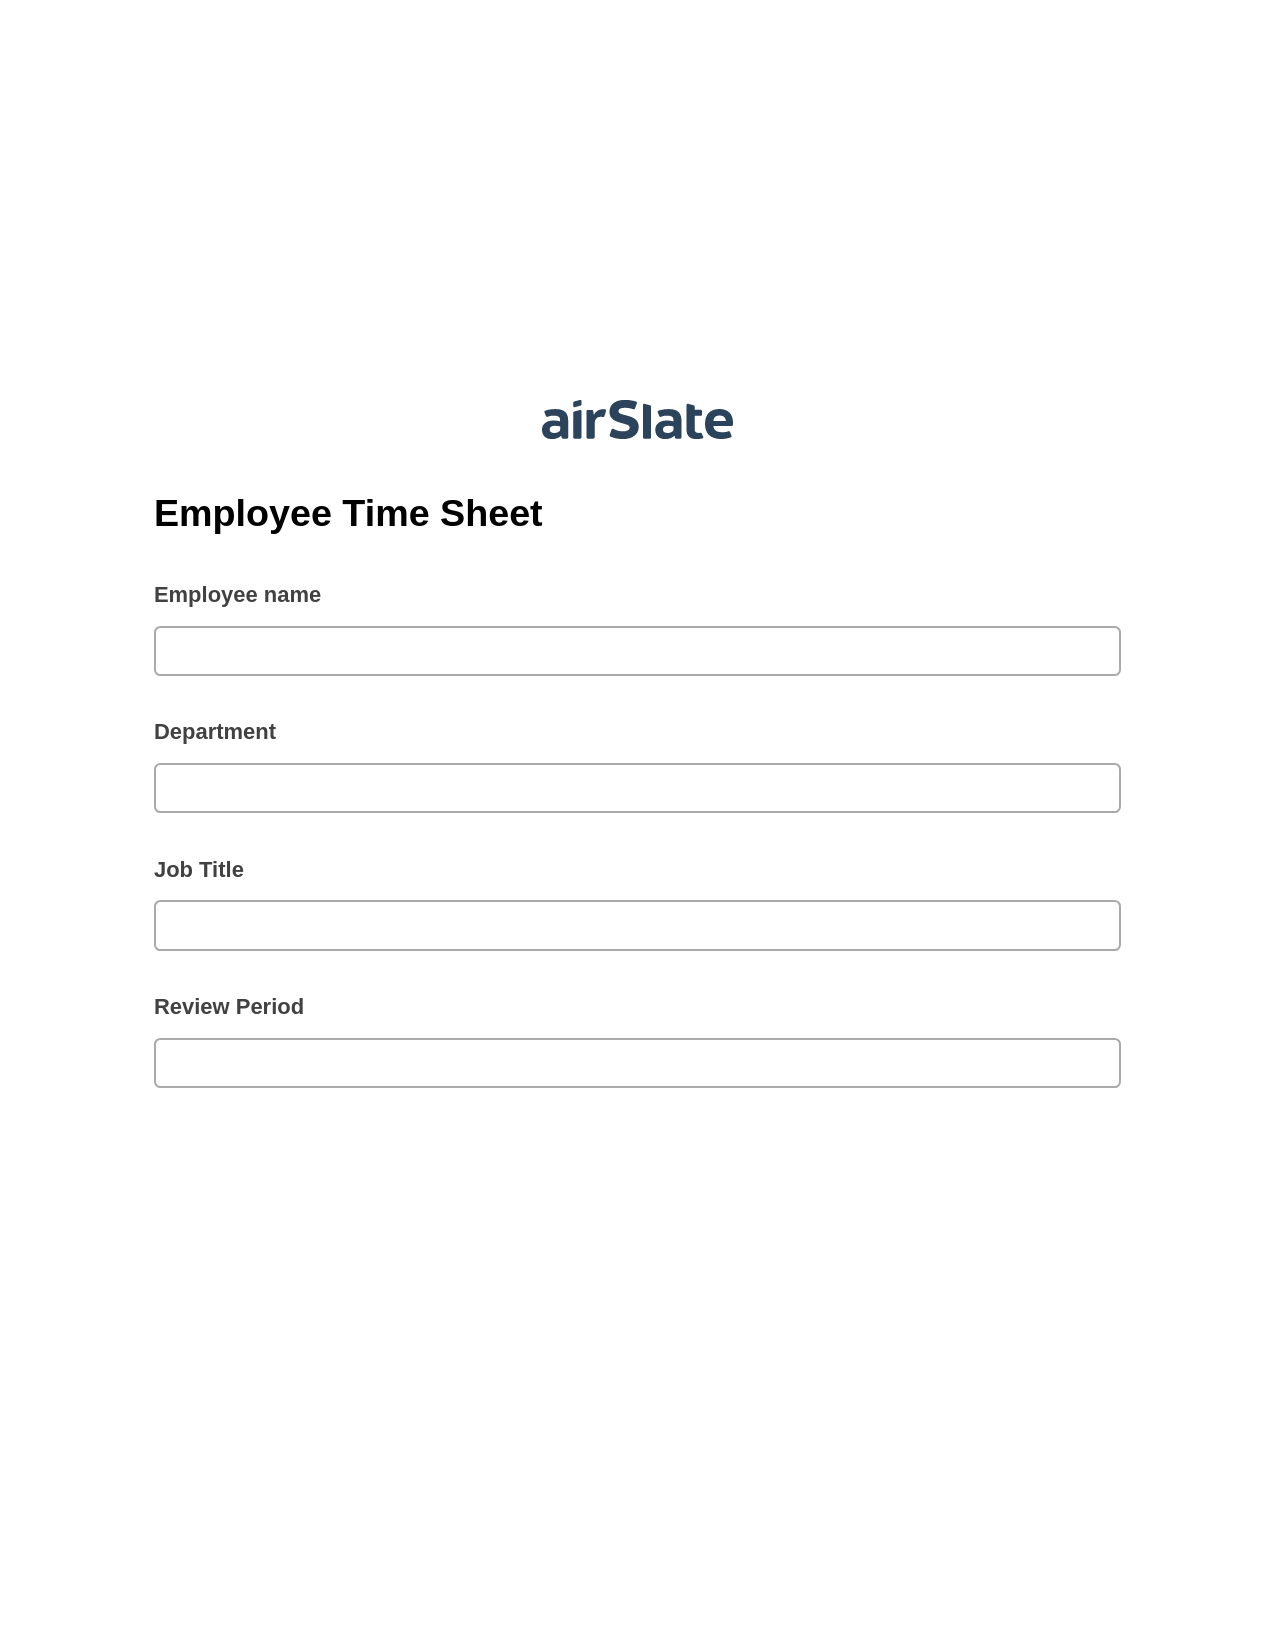 Multirole Employee Time Sheet Pre-fill Dropdowns from Airtable, Create Salesforce Records Bot, Email Notification Postfinish Bot